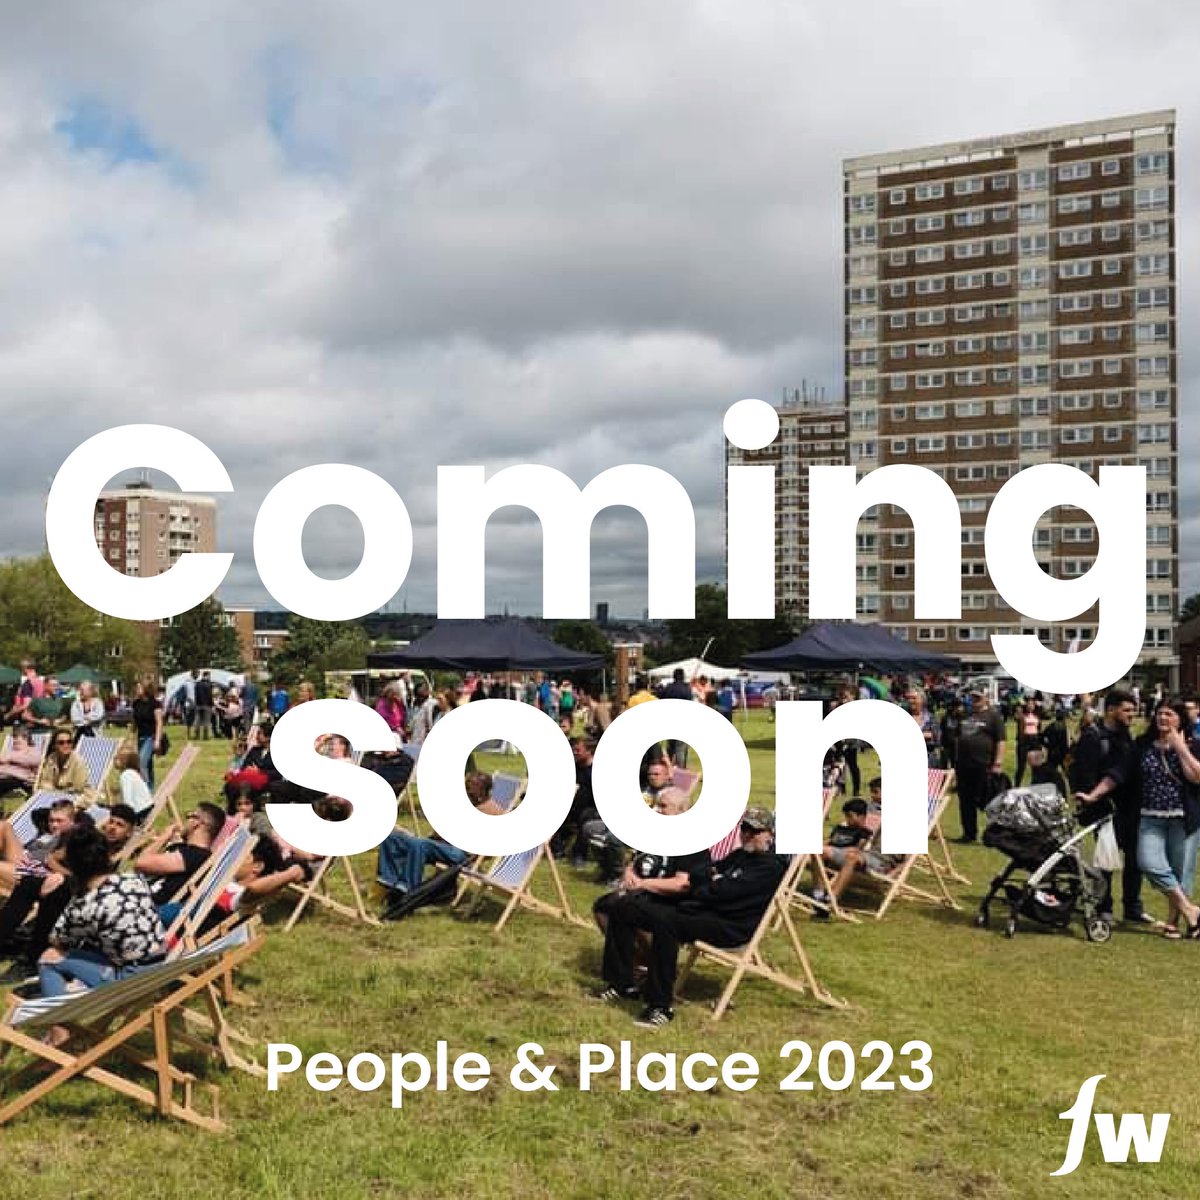 Bubbling underground, soon to break ground! Watch this space 👀 #peopleandplace2023